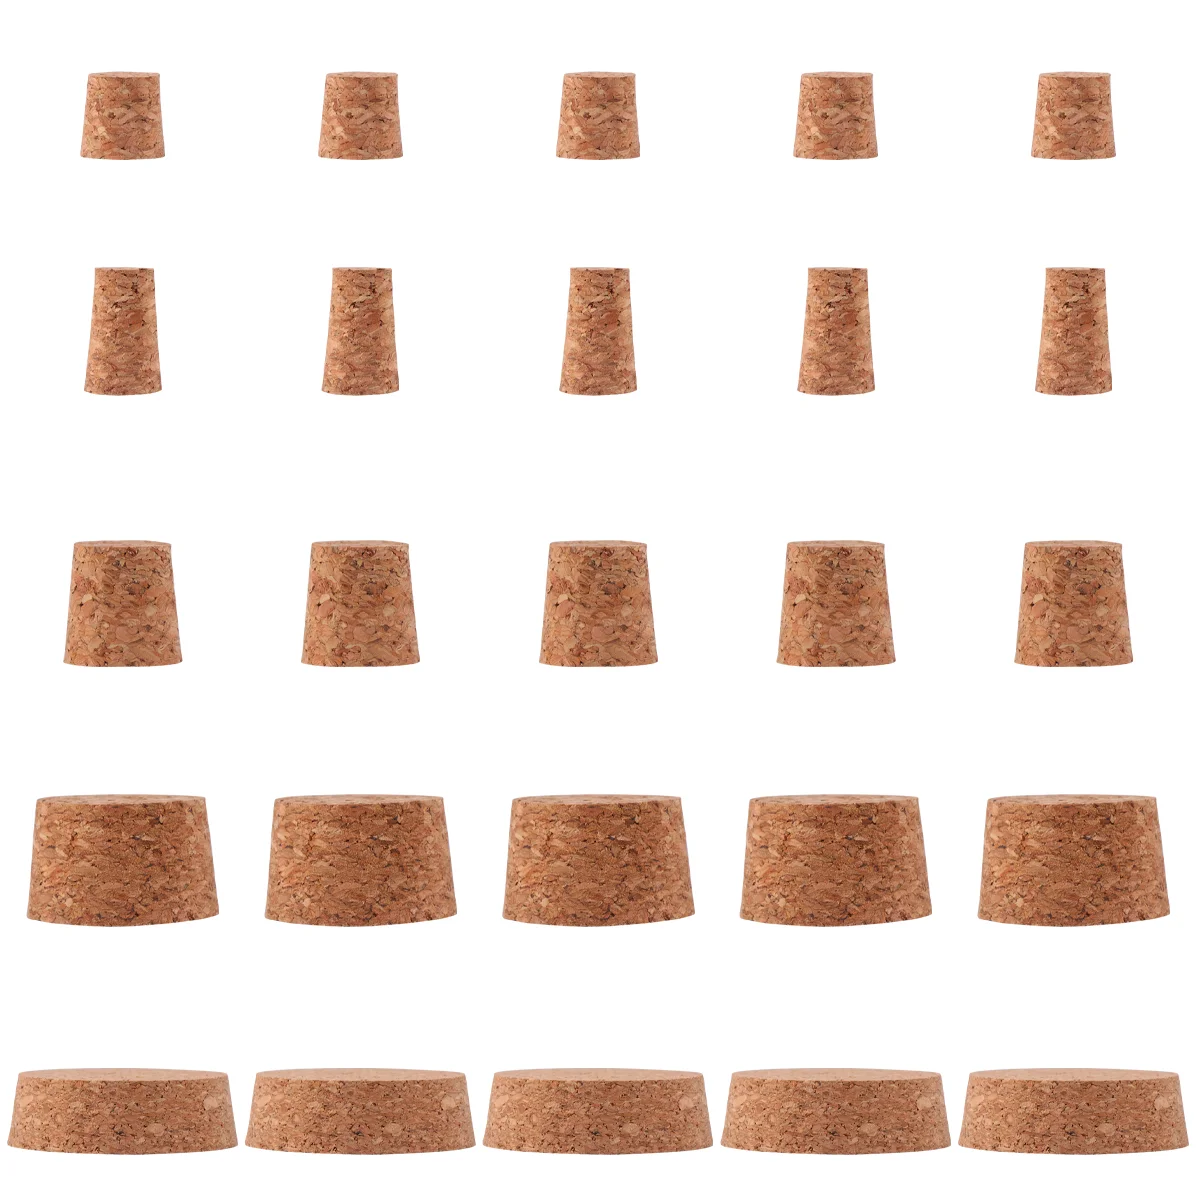 

25 Pcs Wooden Beer Bottle Stopper Cork Stoppers Glass Water Pitcher Creative Vacuum Sealers Barrel Plug Tapered Plugs